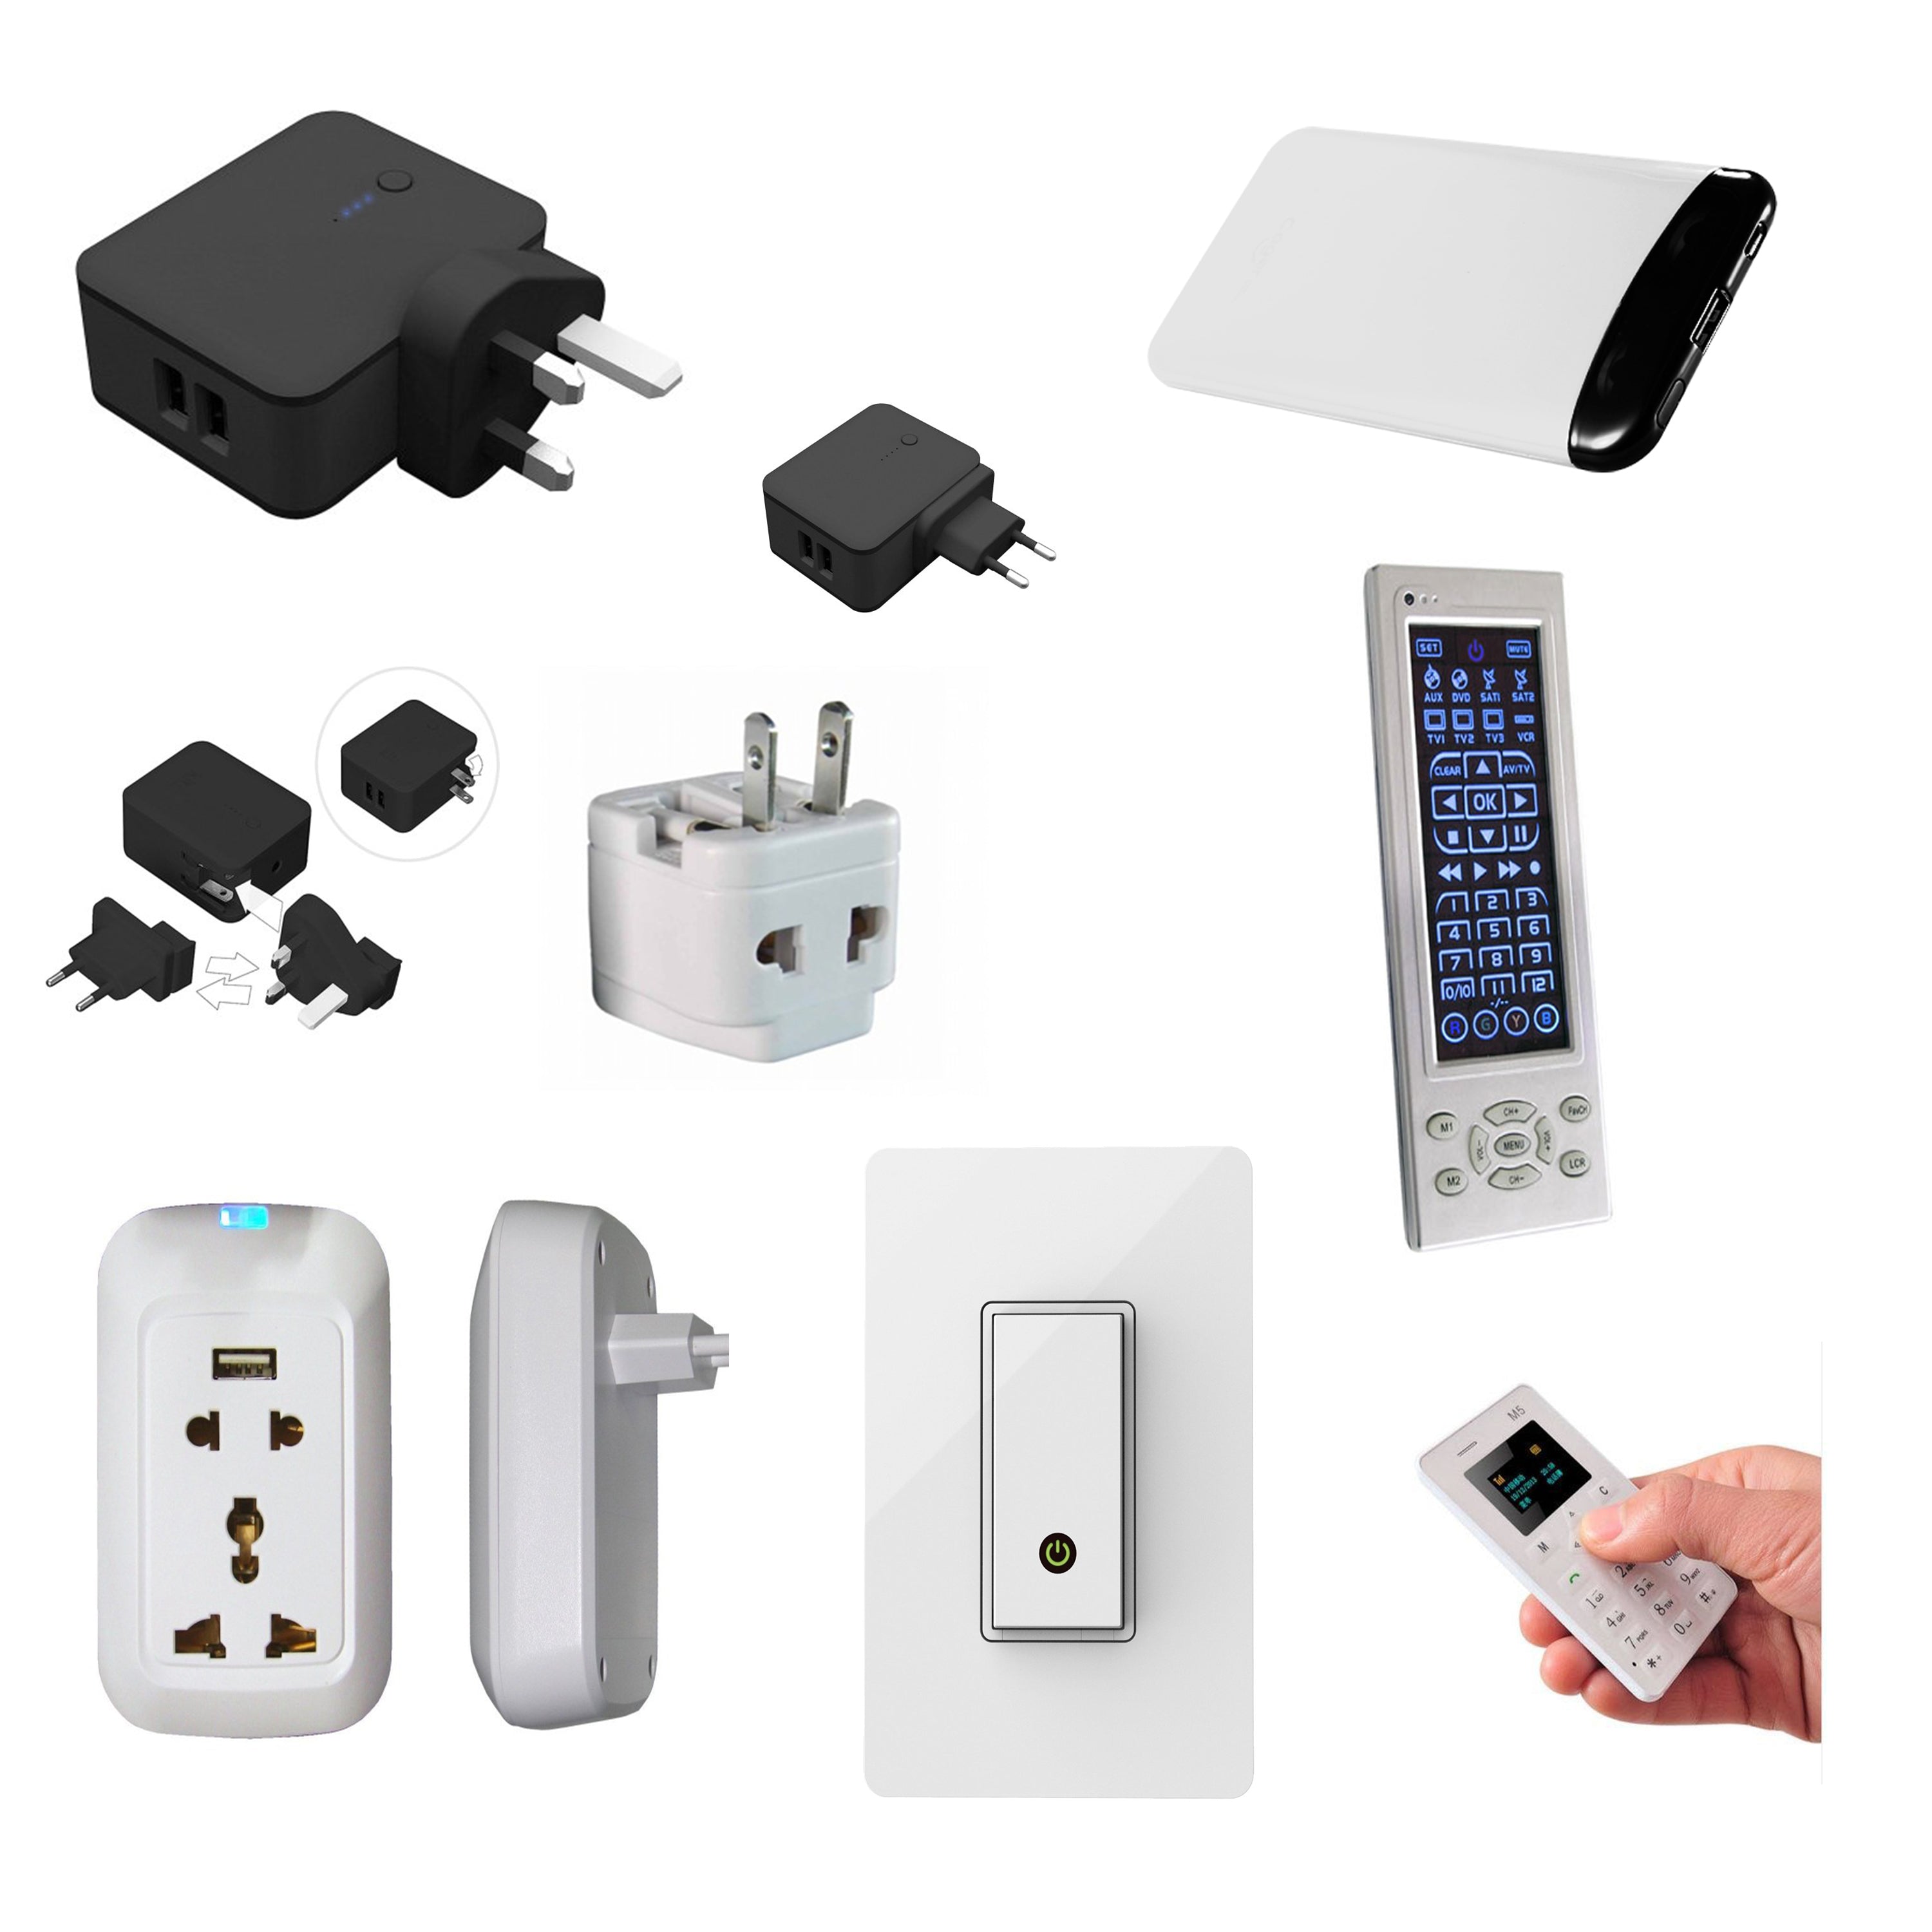 ADAPTERS, PLUGS, SWITCHES, DIMMERS, TRANSFORMERS, CONVERTERS,  POWER BANKS,  REMOTE CONTROLS